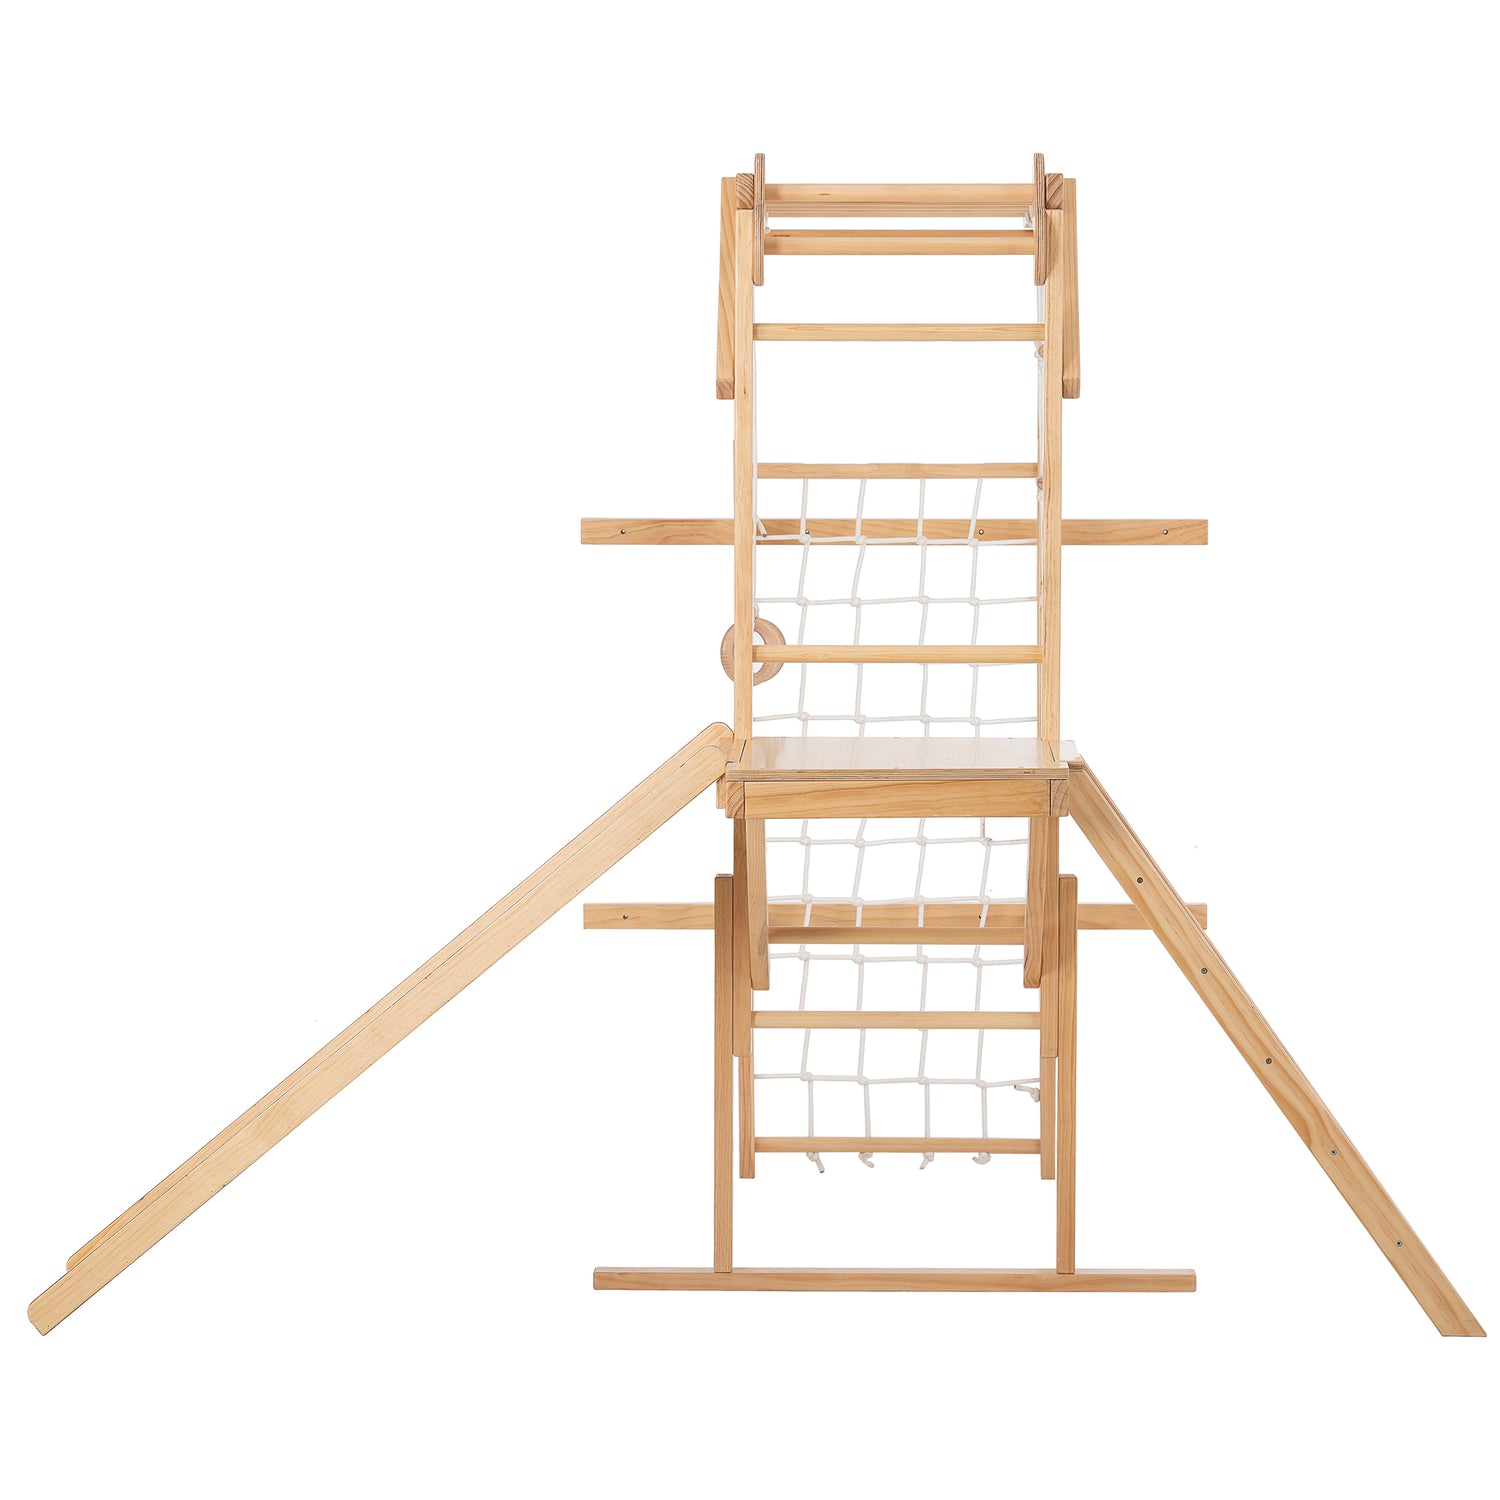 The Grove Jungle Gym - Avenlur's Premium 8 in 1 Wooden Playset for Older Kids in Natural Wood Color - Side View